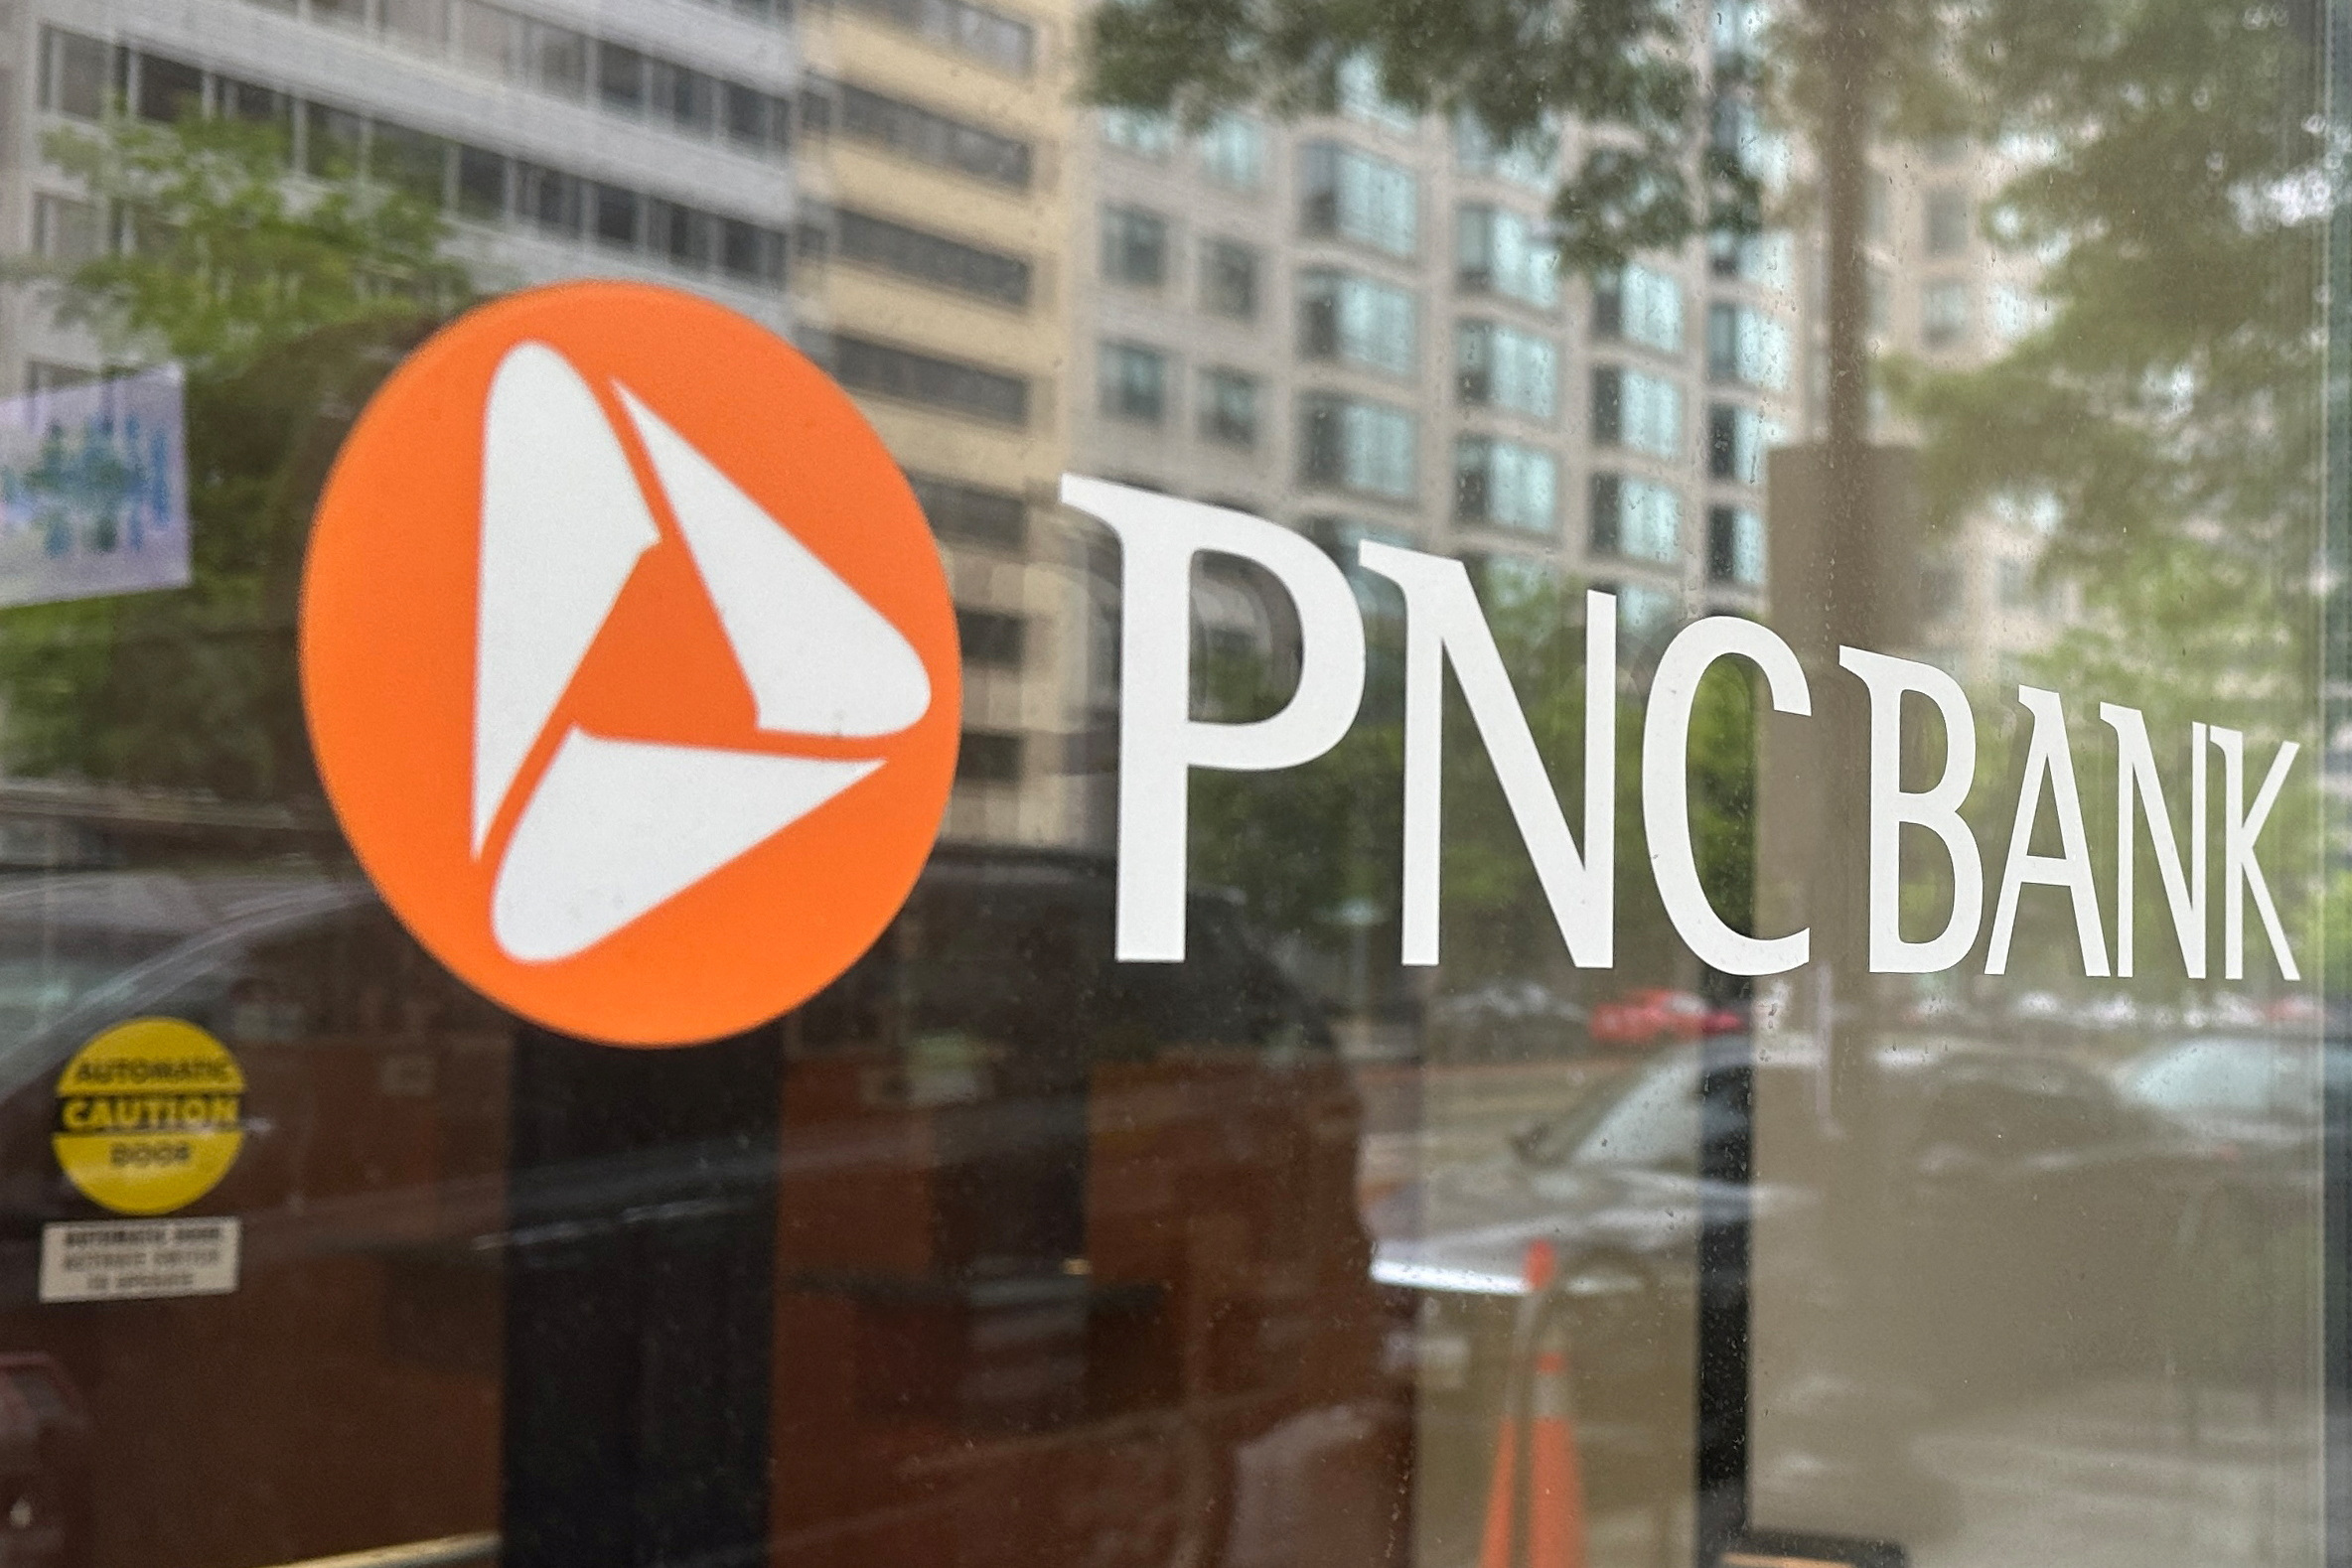 Branch of PNC Bank, a subsidiary of PNC Financial Services Group, in Washington